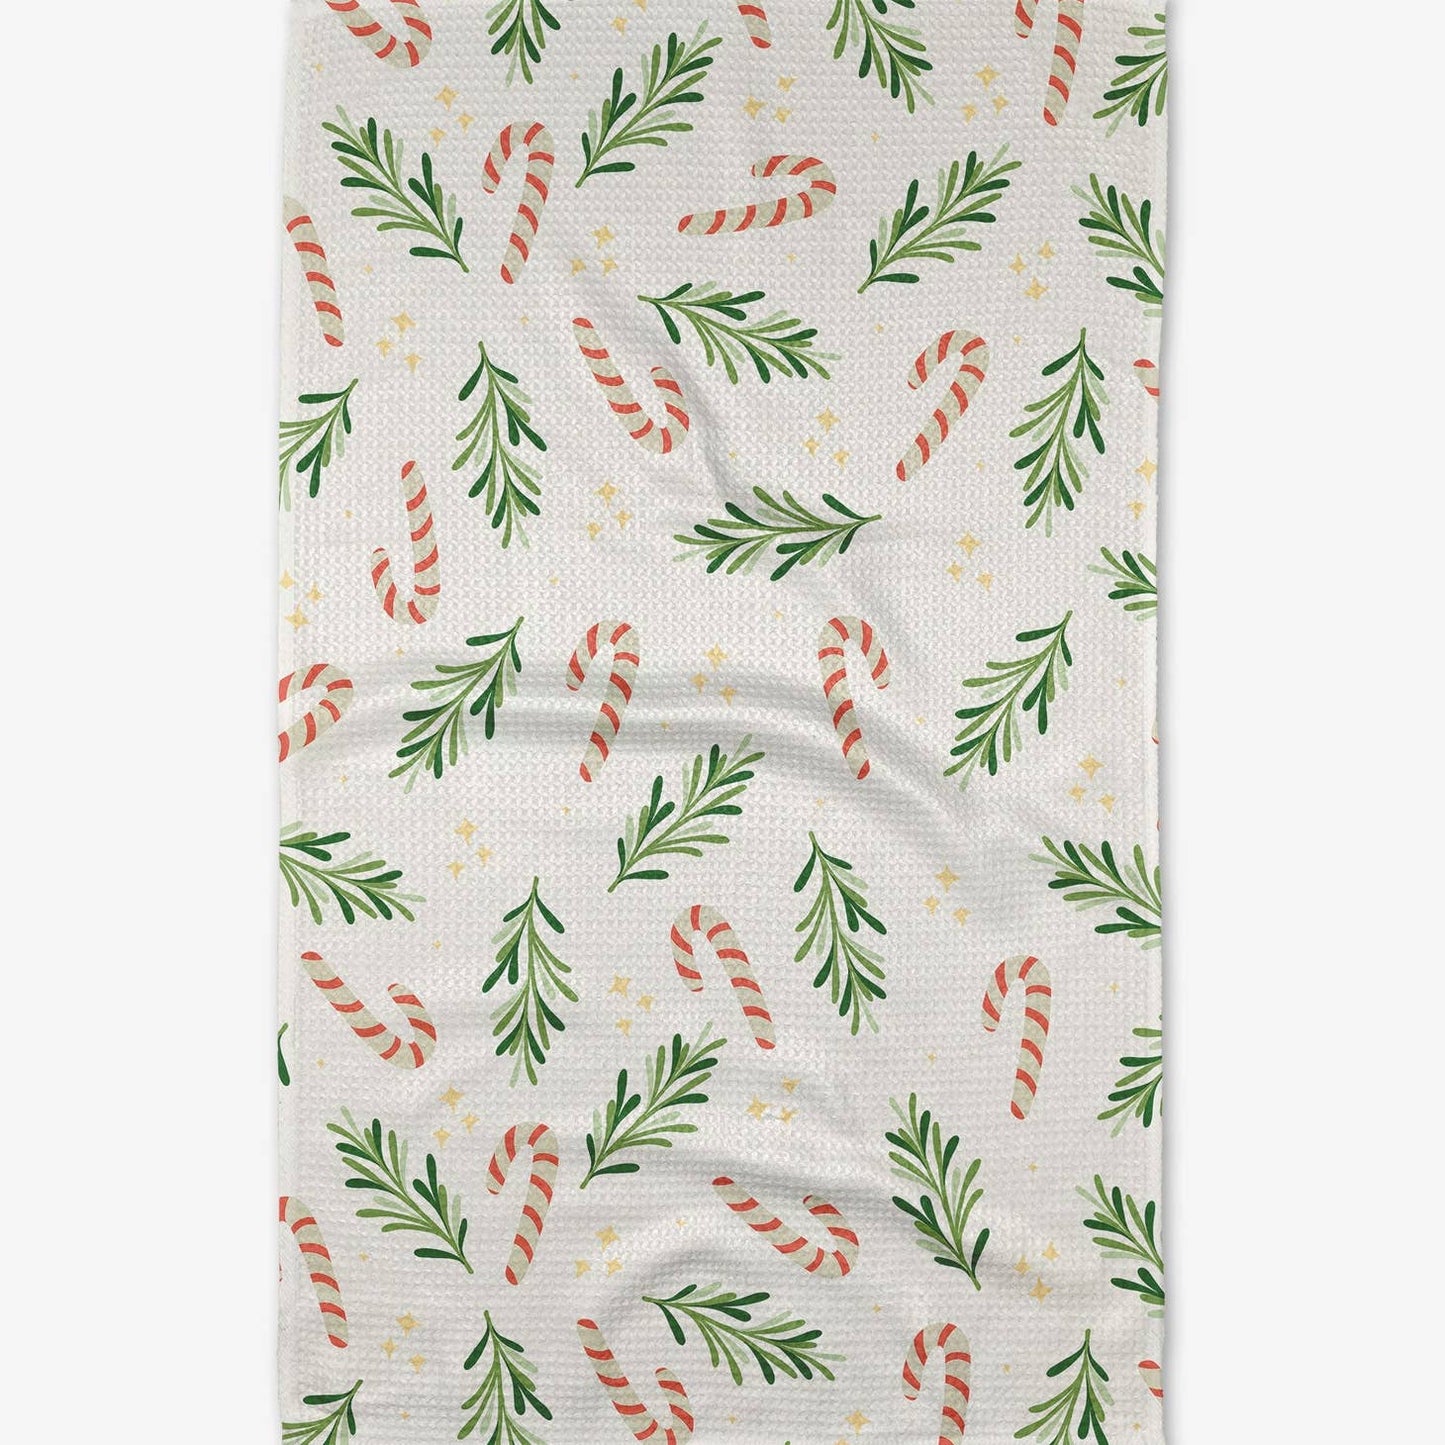 Geometry Happy Holidays Kitchen Towel - Favorite Little Things Co